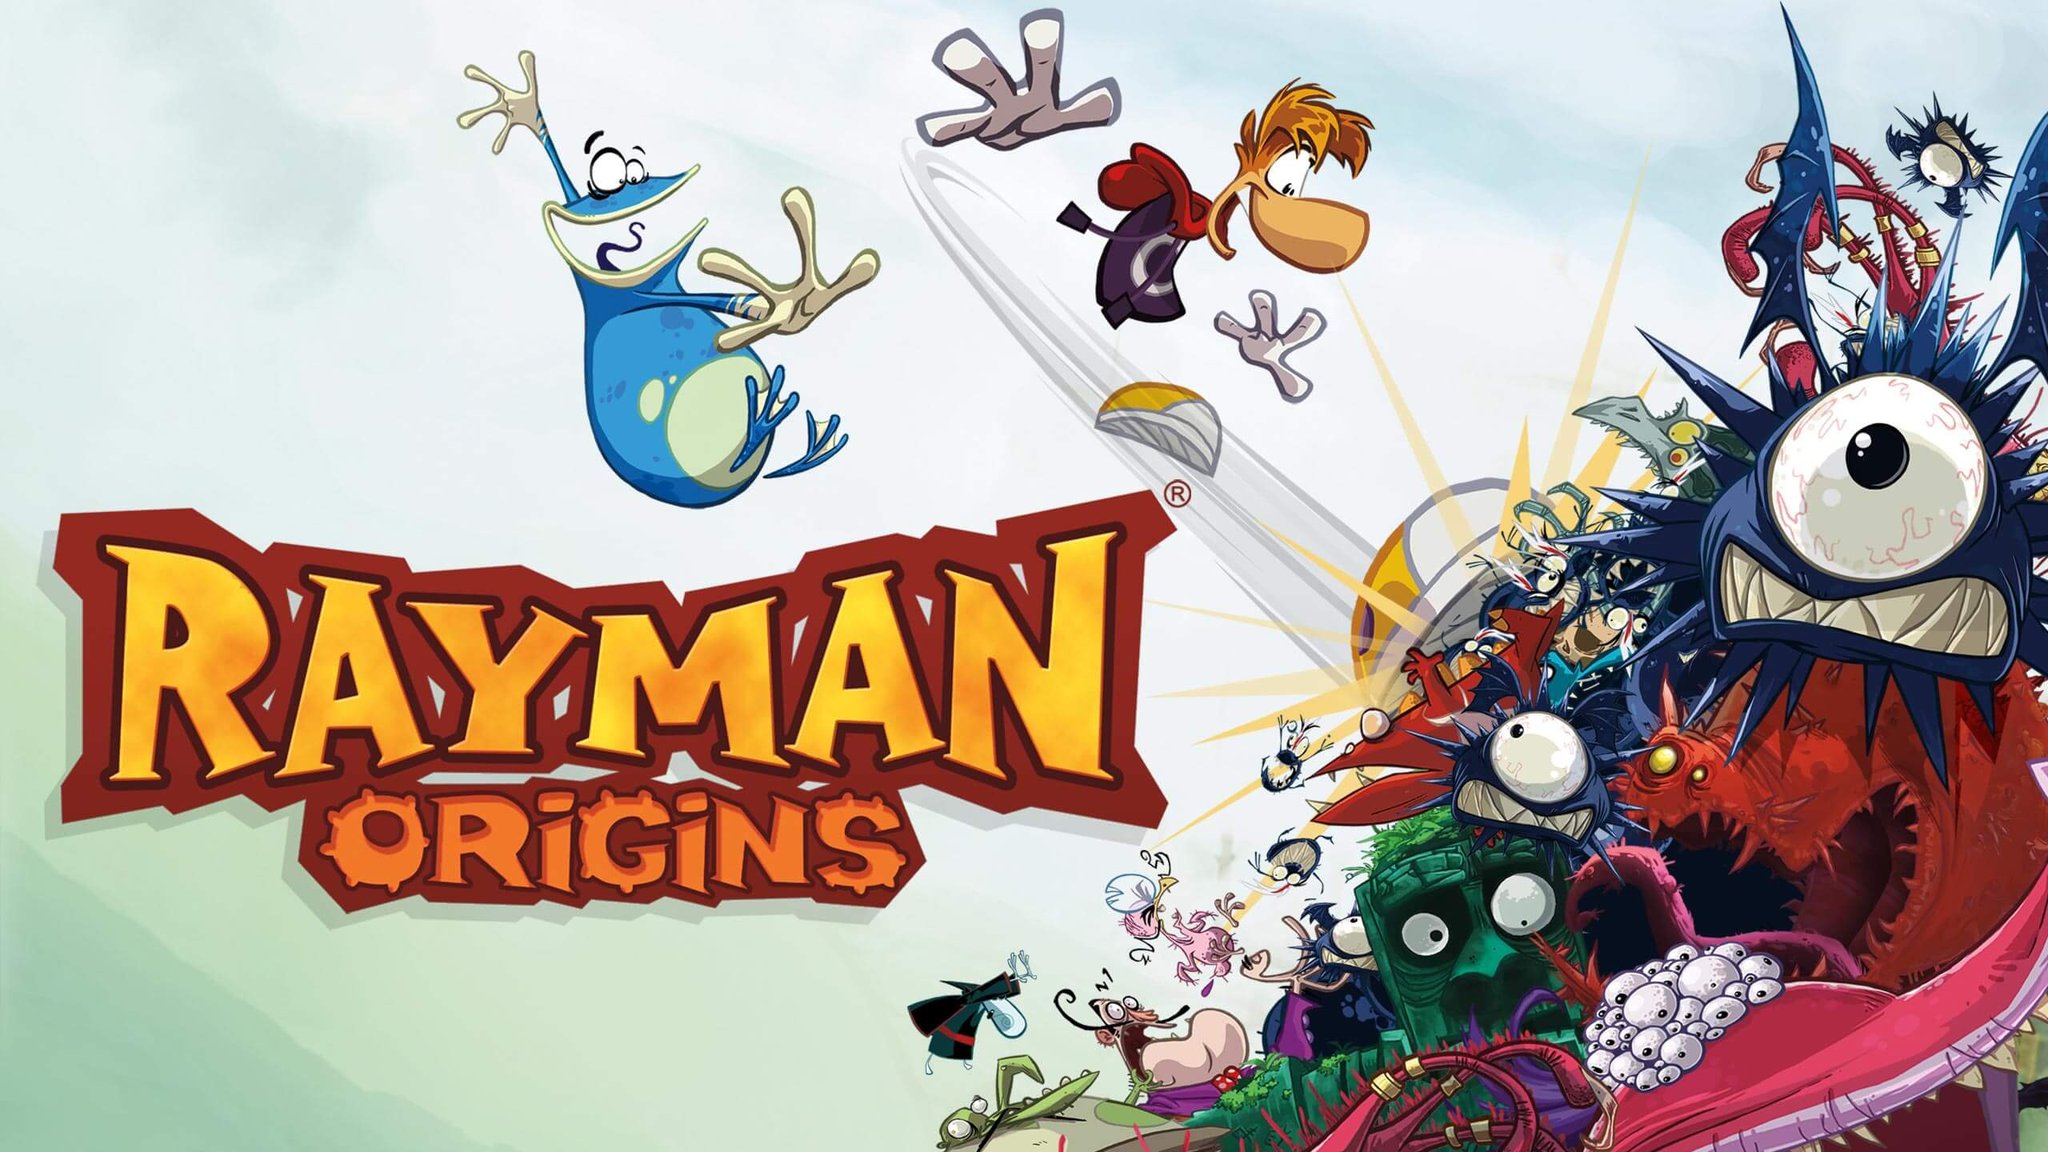 RAYMAN LEGENDS Free On PC Thanks To Ubisoft — GameTyrant